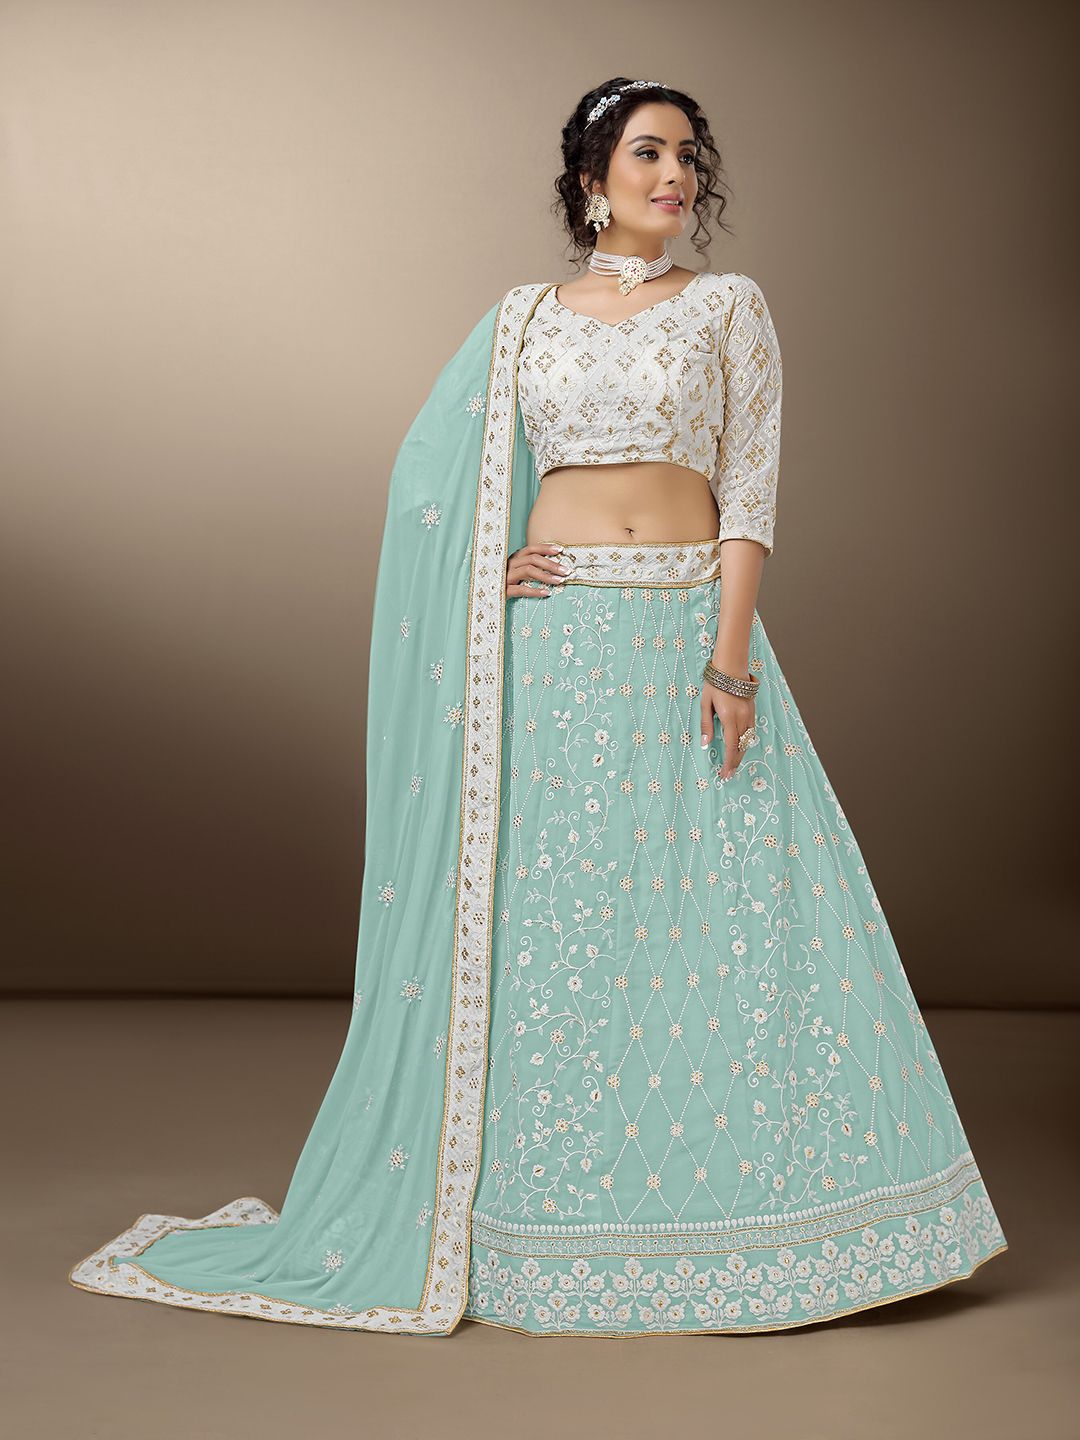 Sarvayog Fashion Embroidered Semi-Stitched Lehenga & Unstitched Blouse With Dupatta Price in India